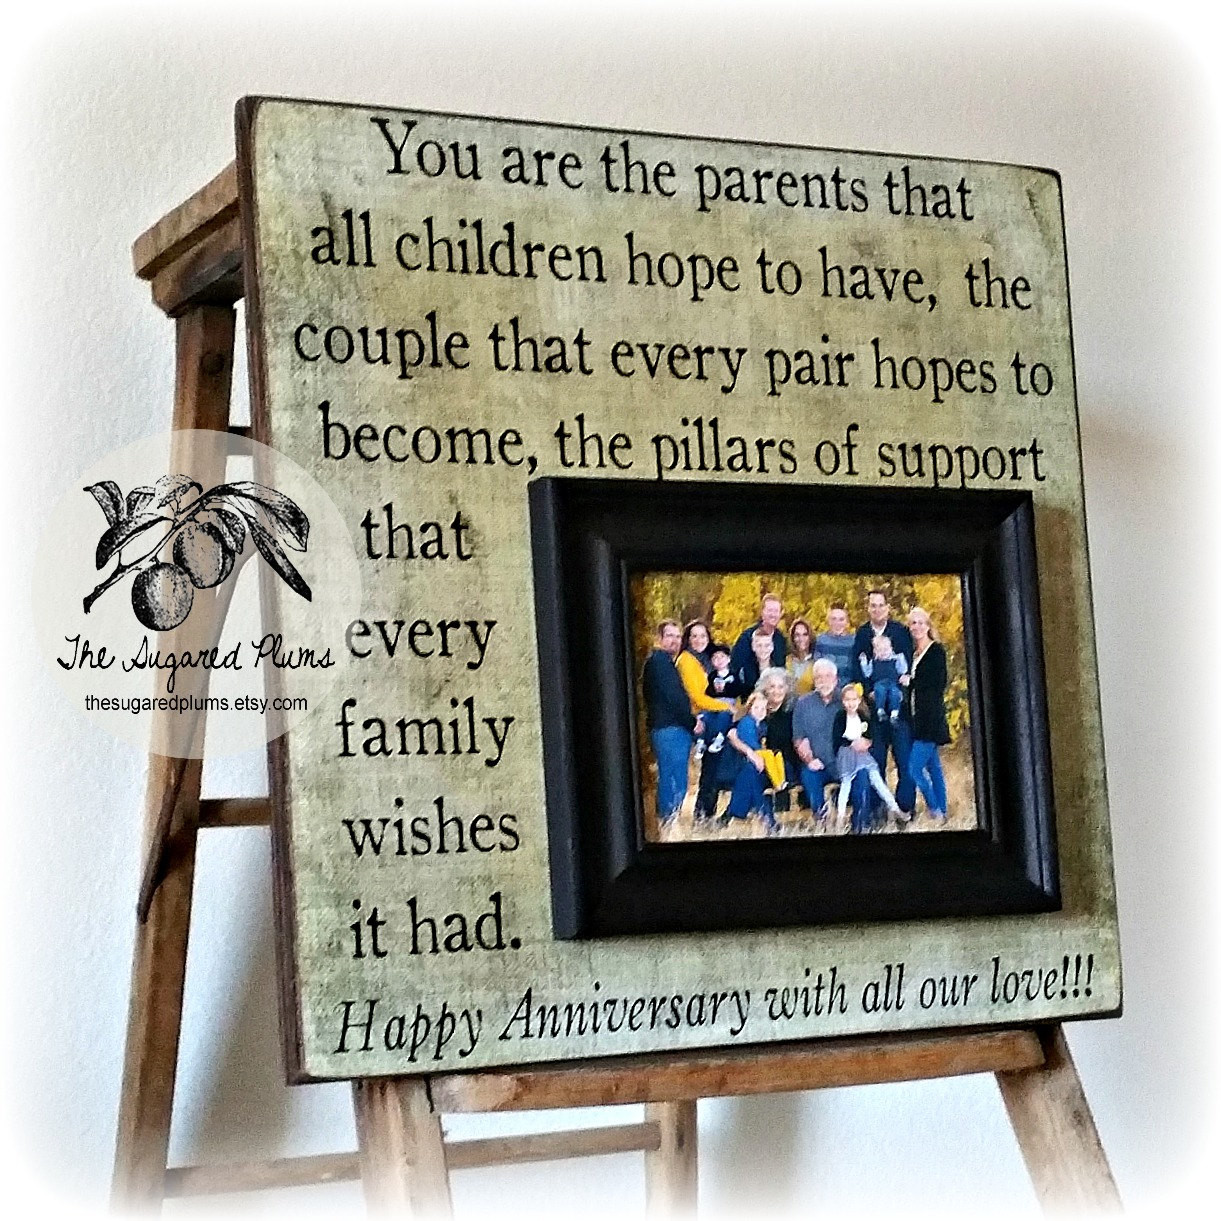 50 Anniversary Gift Ideas For Parents
 Parents Anniversary Gift 50th Anniversary Gifts You are the